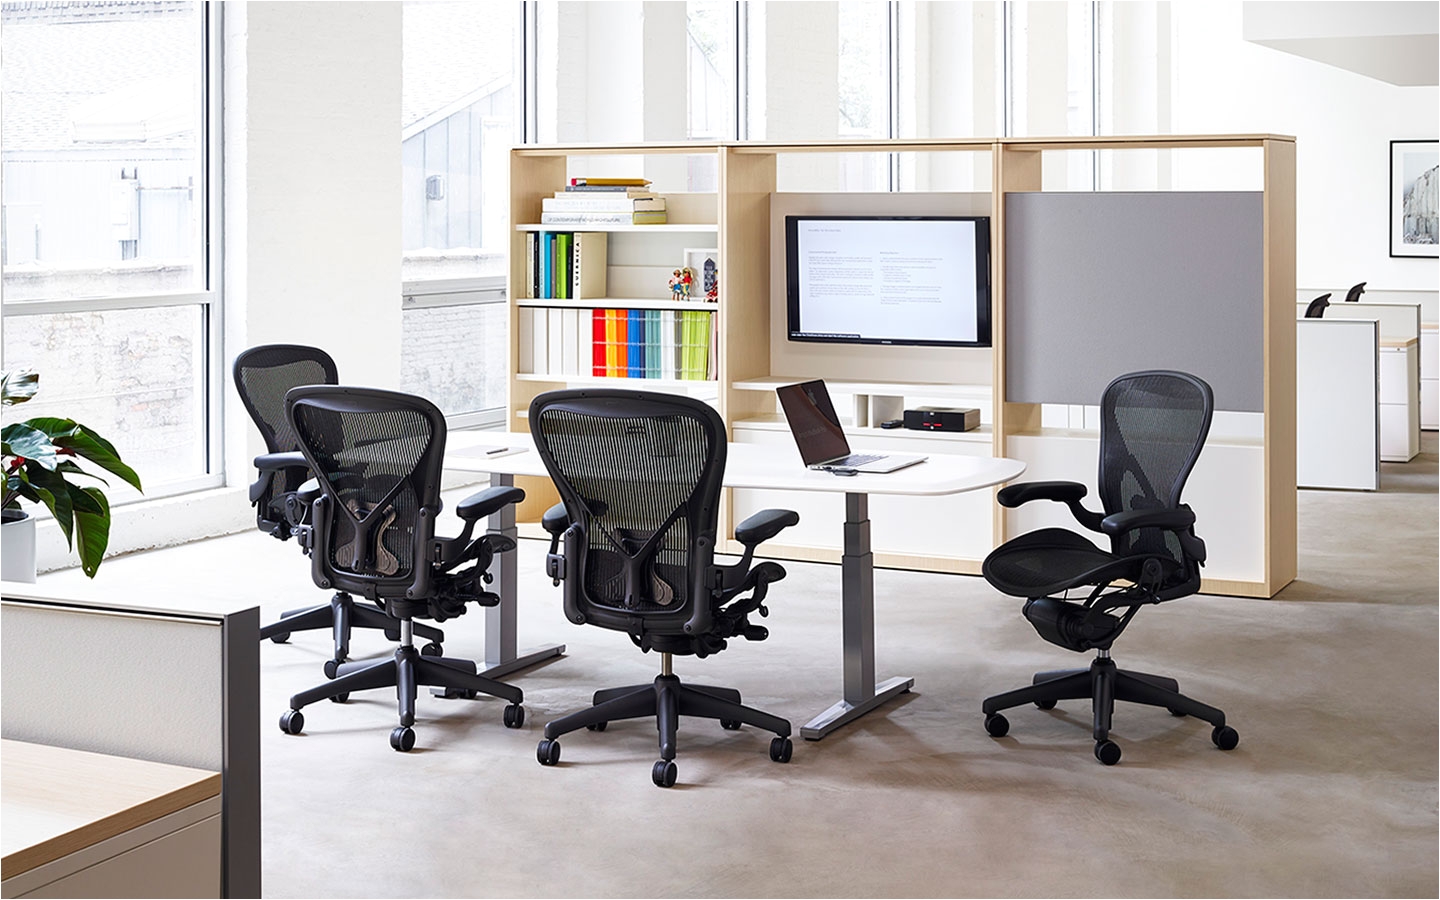 Used Conference Table and Chairs Set Buying An Aeron Chair Read This First Office Designs Blog